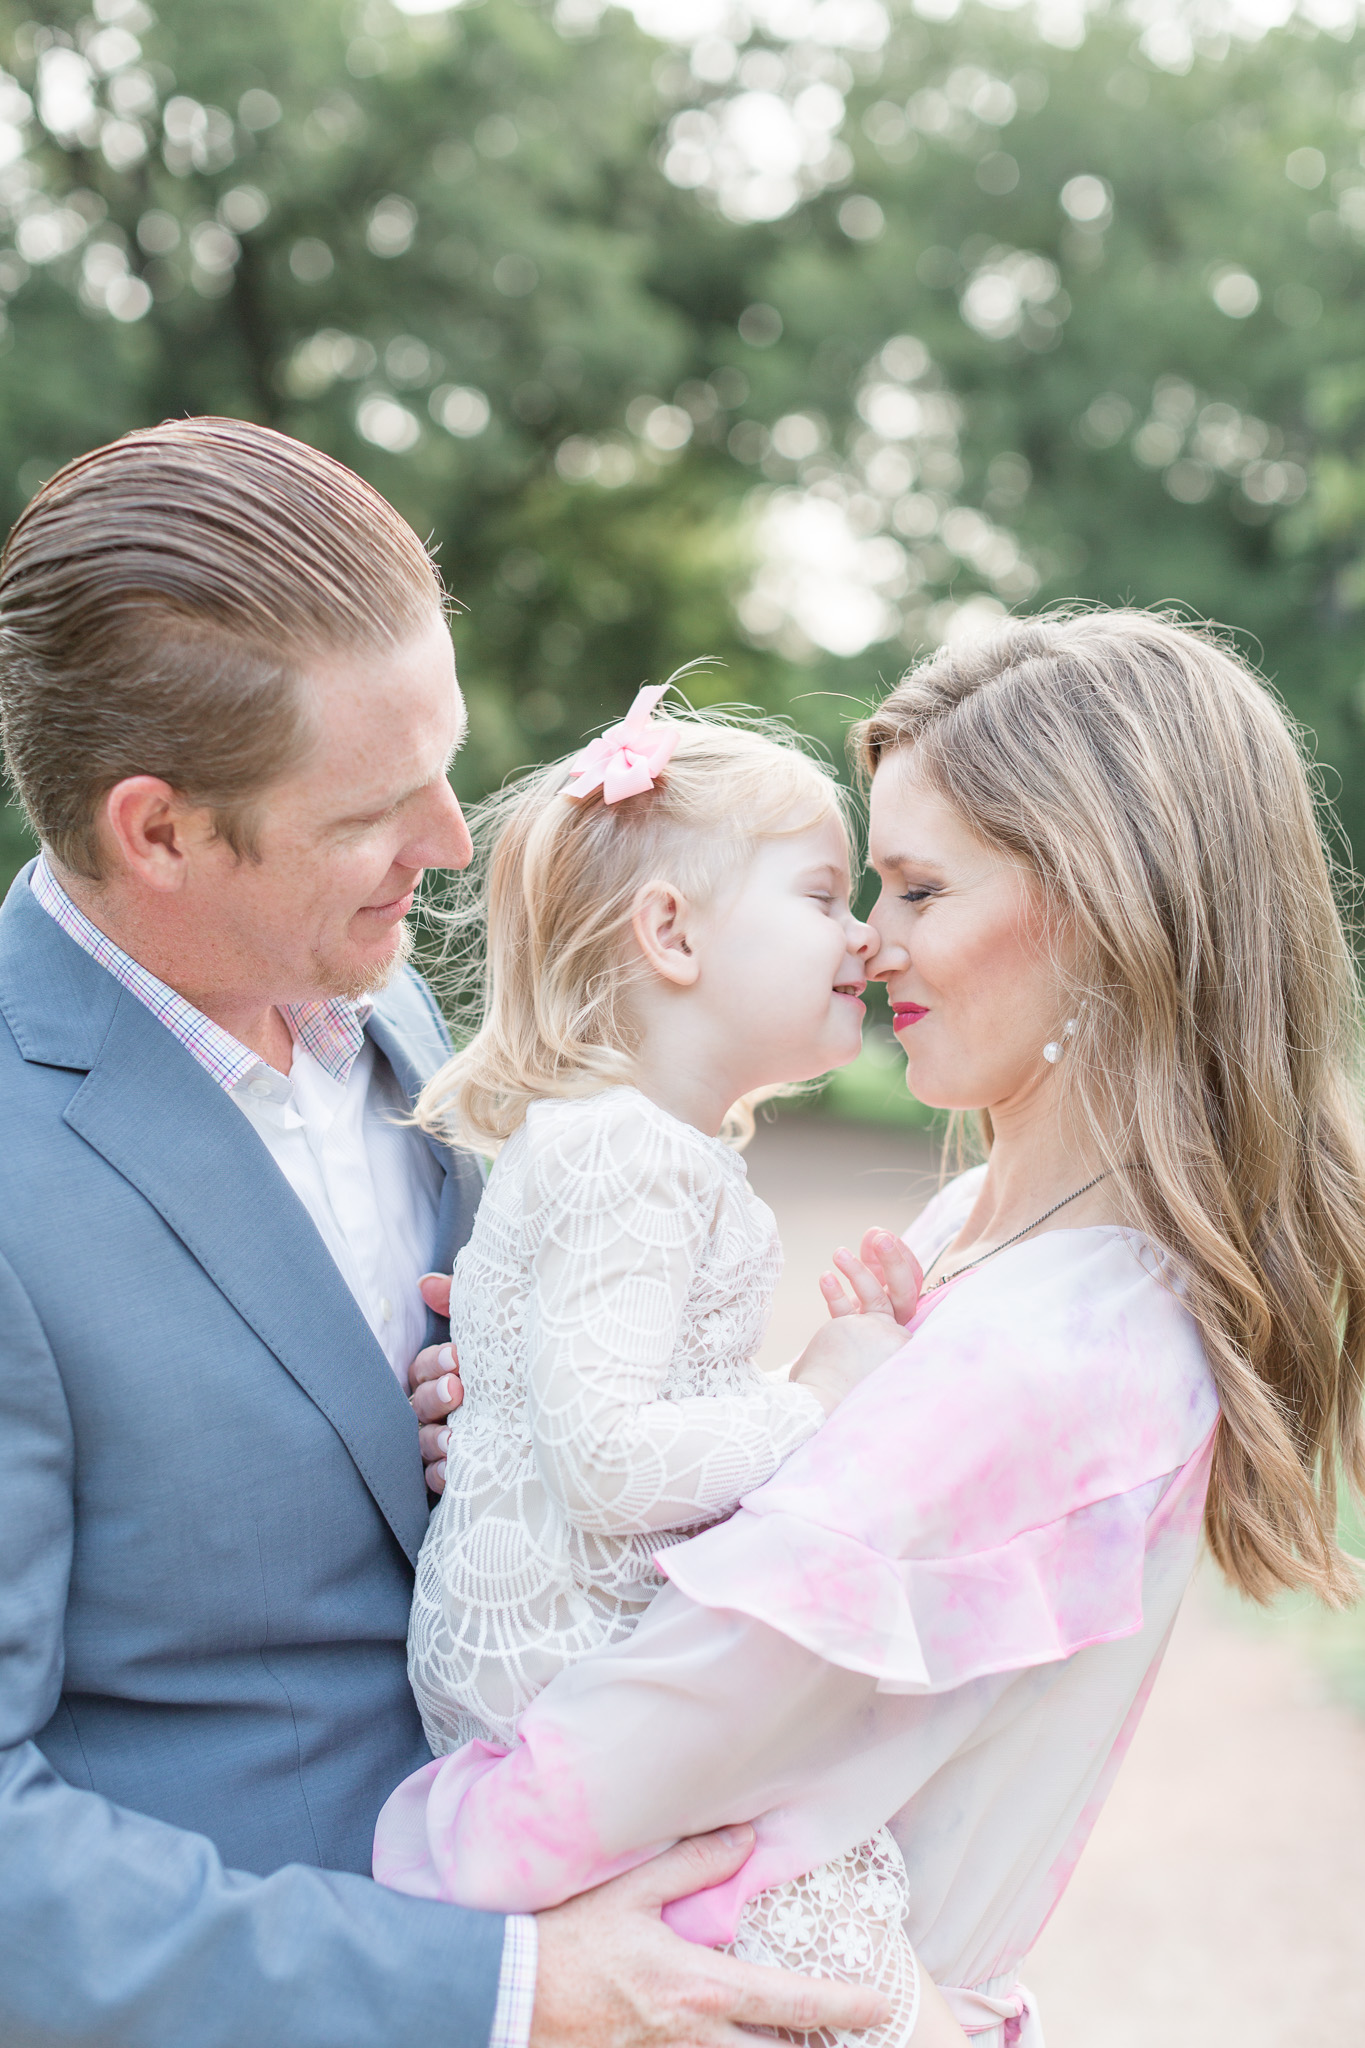 Fort worth family photographer